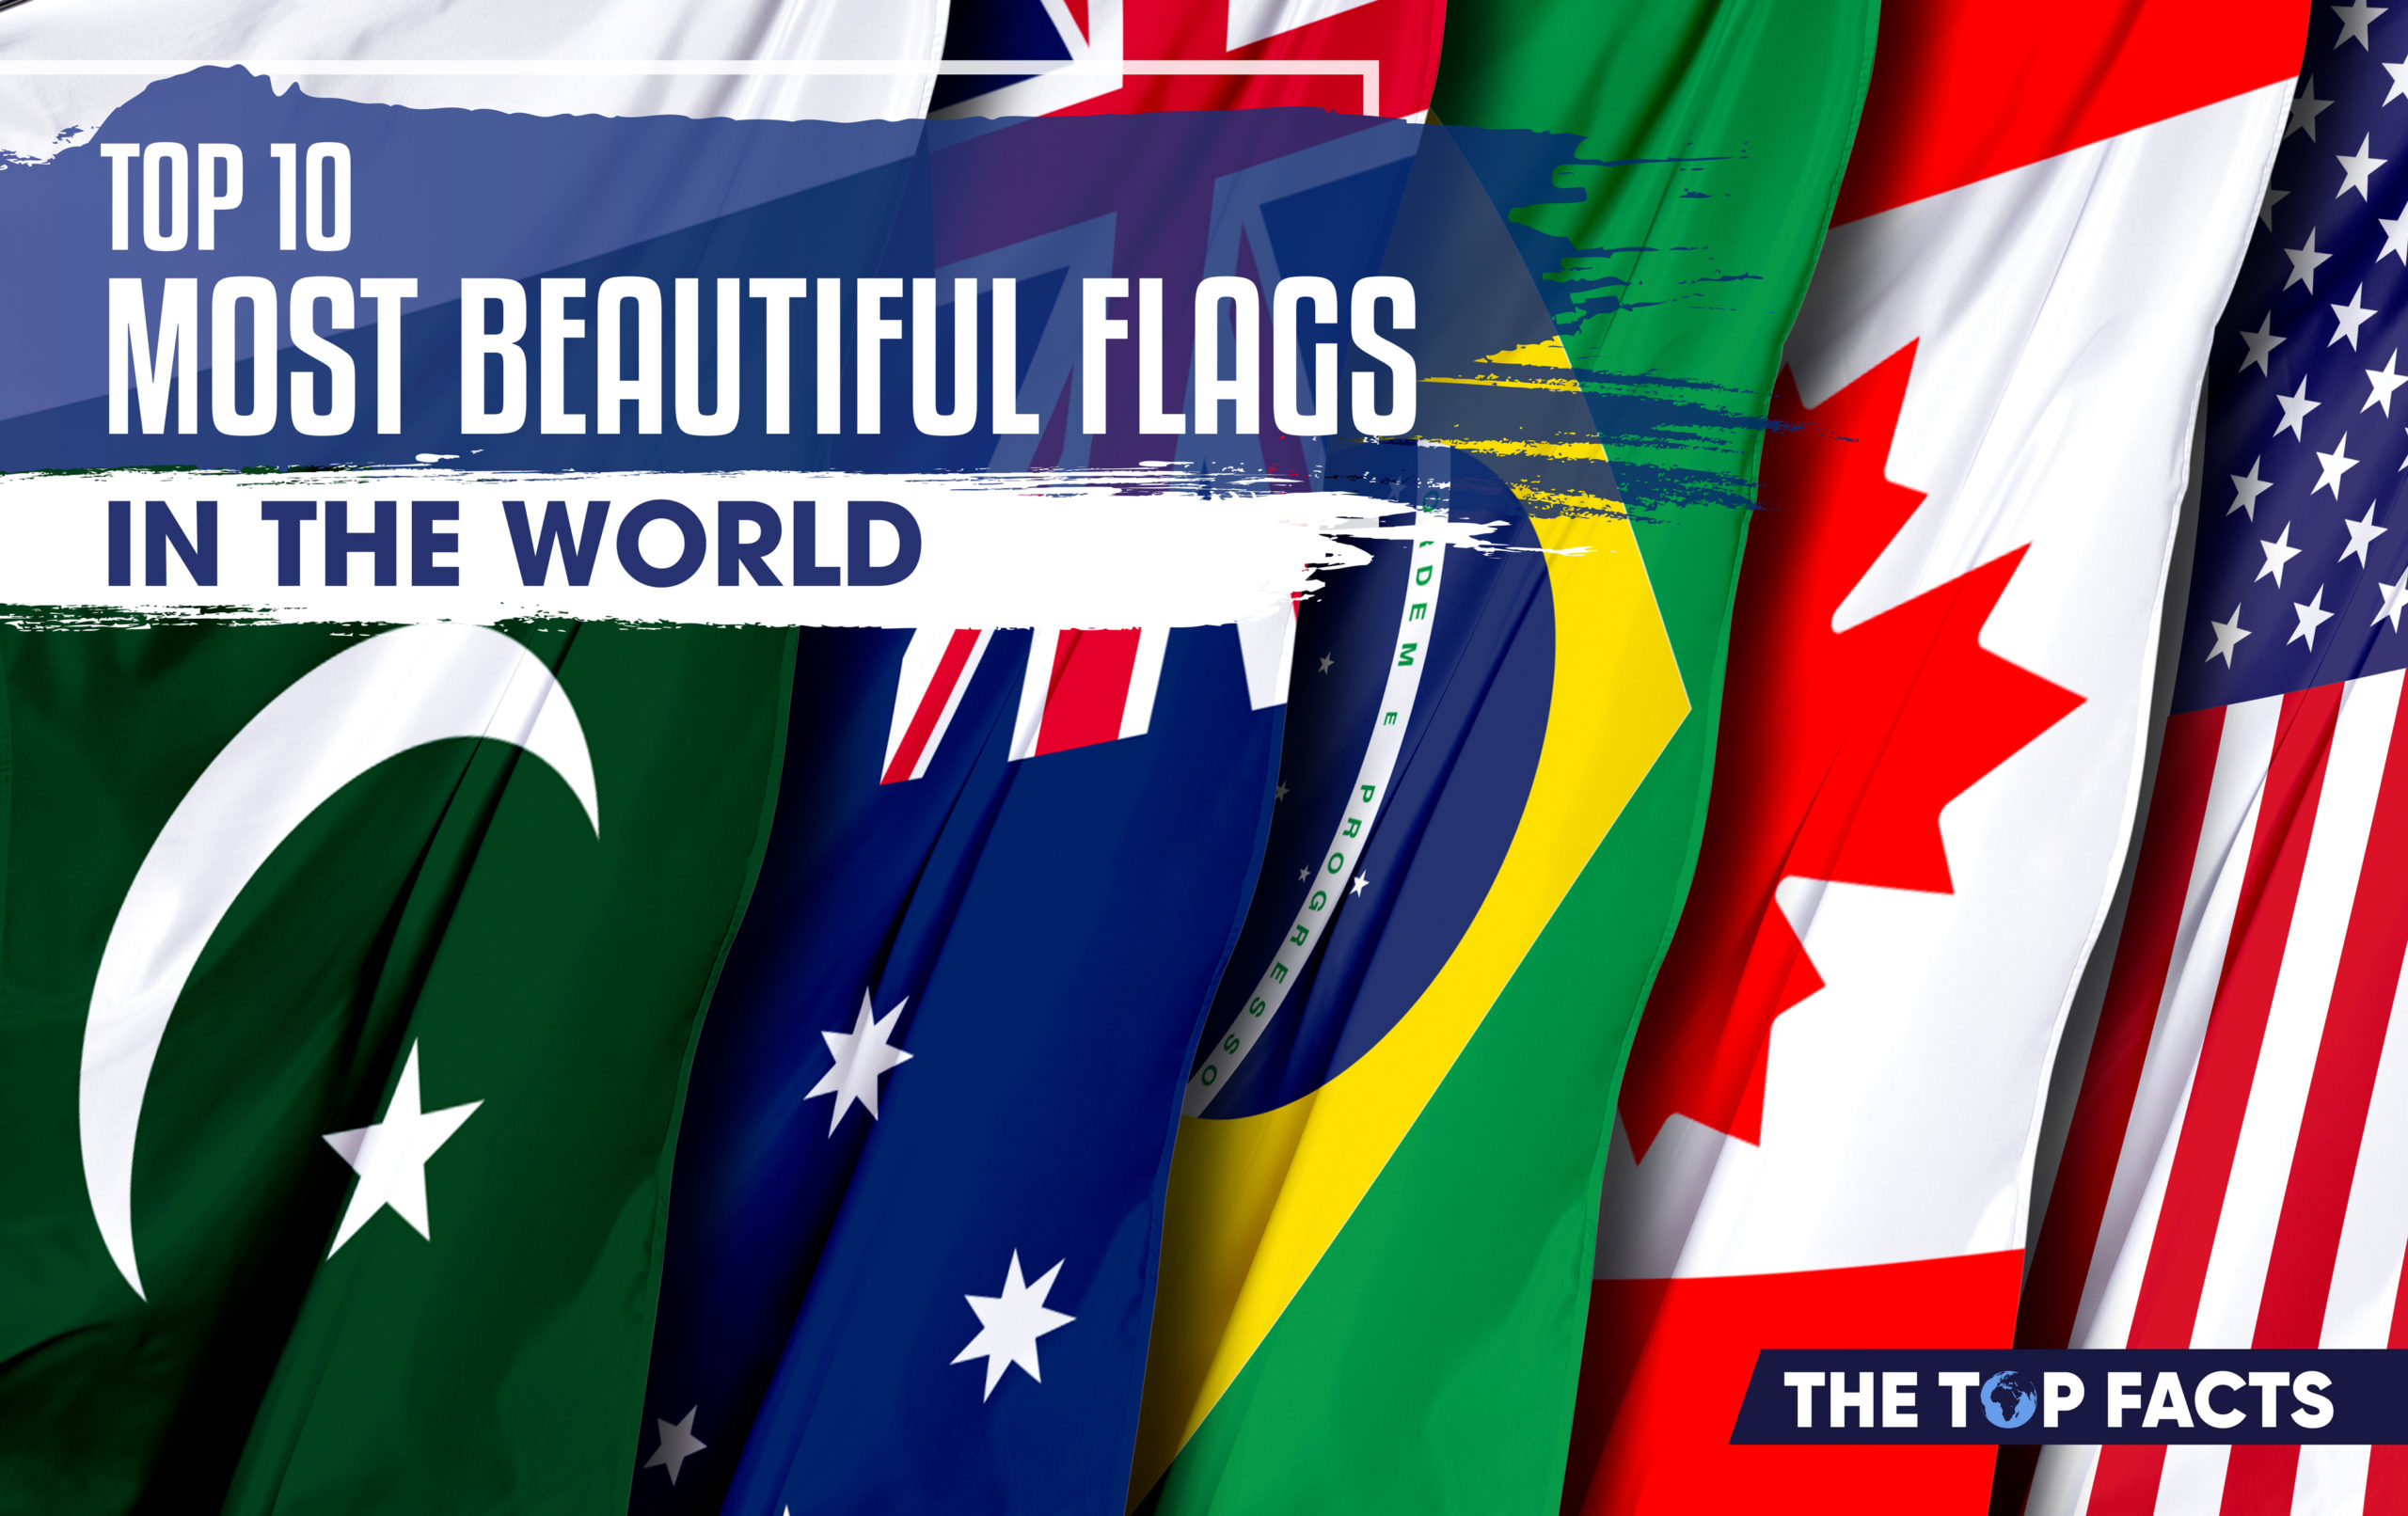 Beautiful flags Top 10 Most Beautiful flags in the World